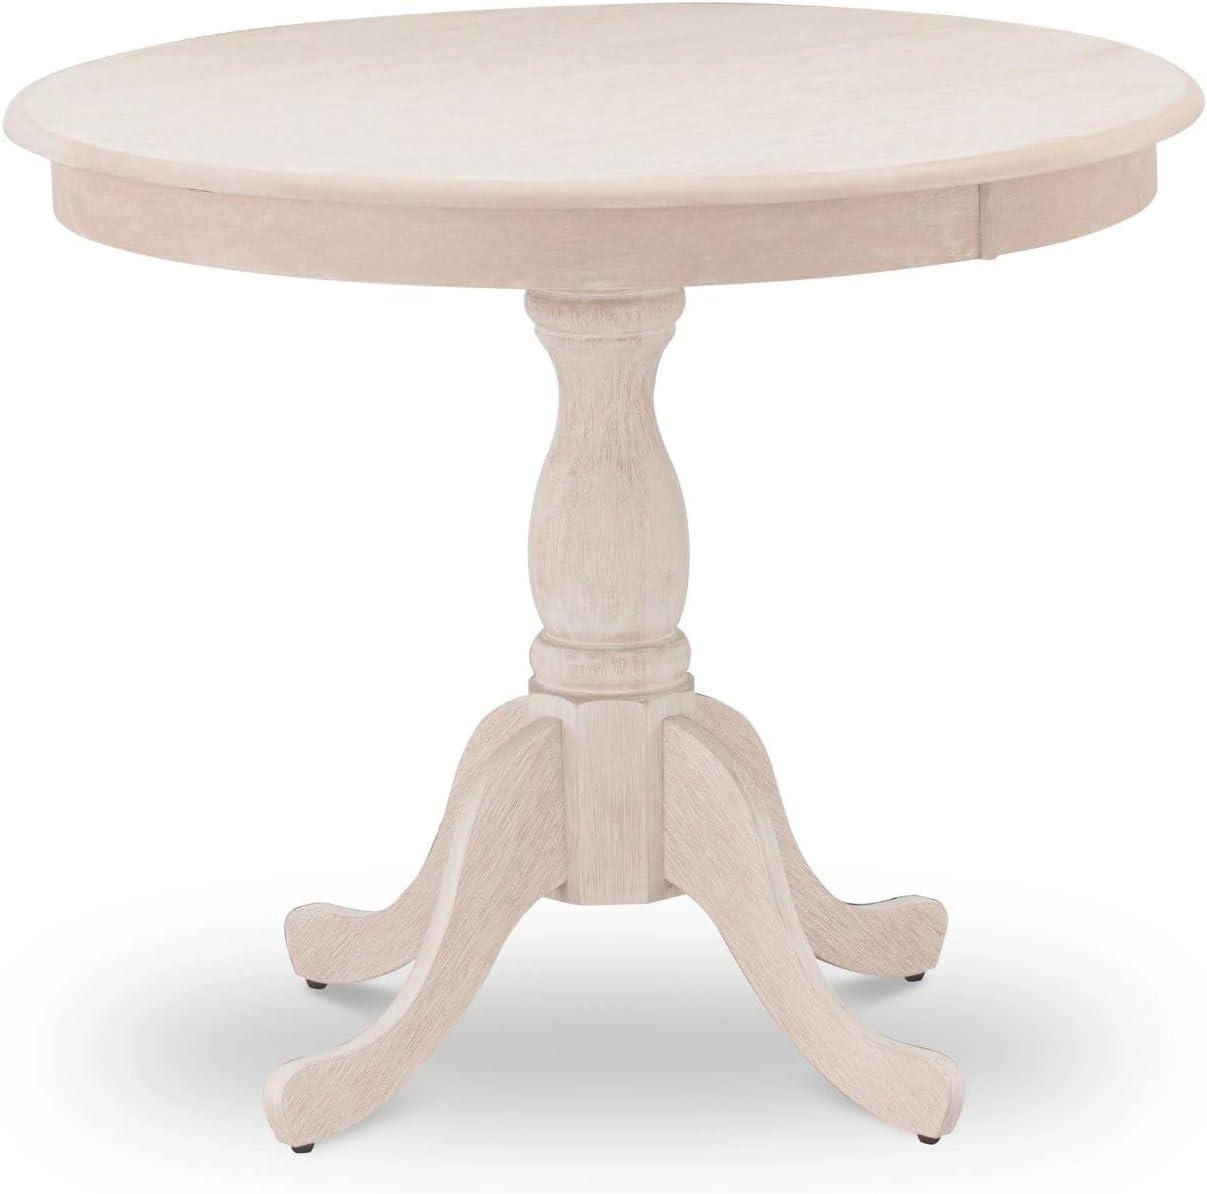 Contemporary Butter Cream Round Rubberwood Dining Table, 36"